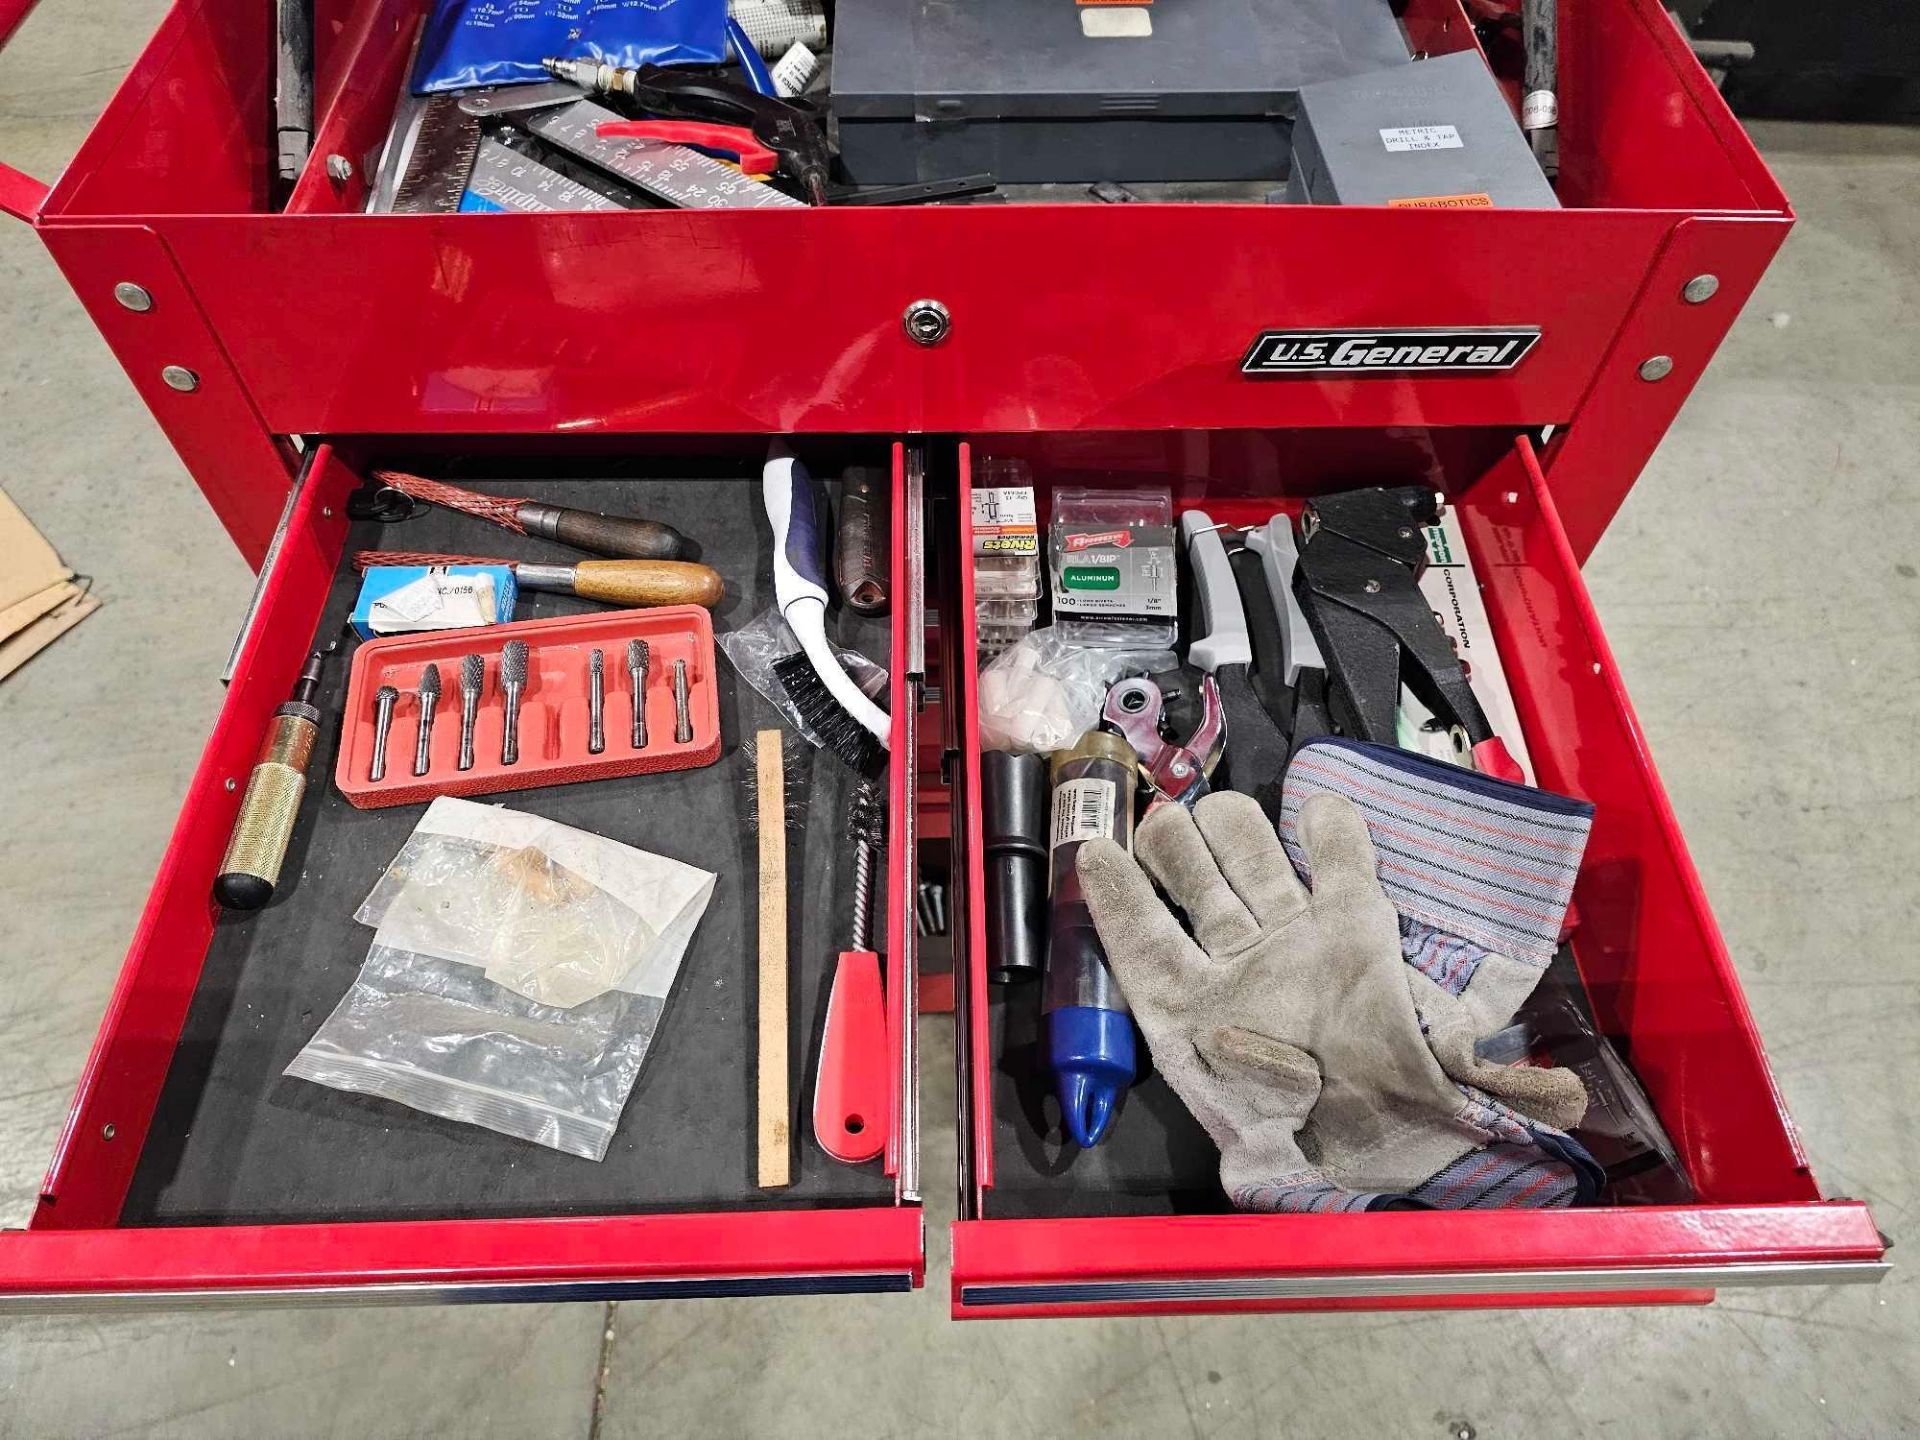 US GENERAL TOOL BOX LOADED WITH TOOLS - Image 6 of 11